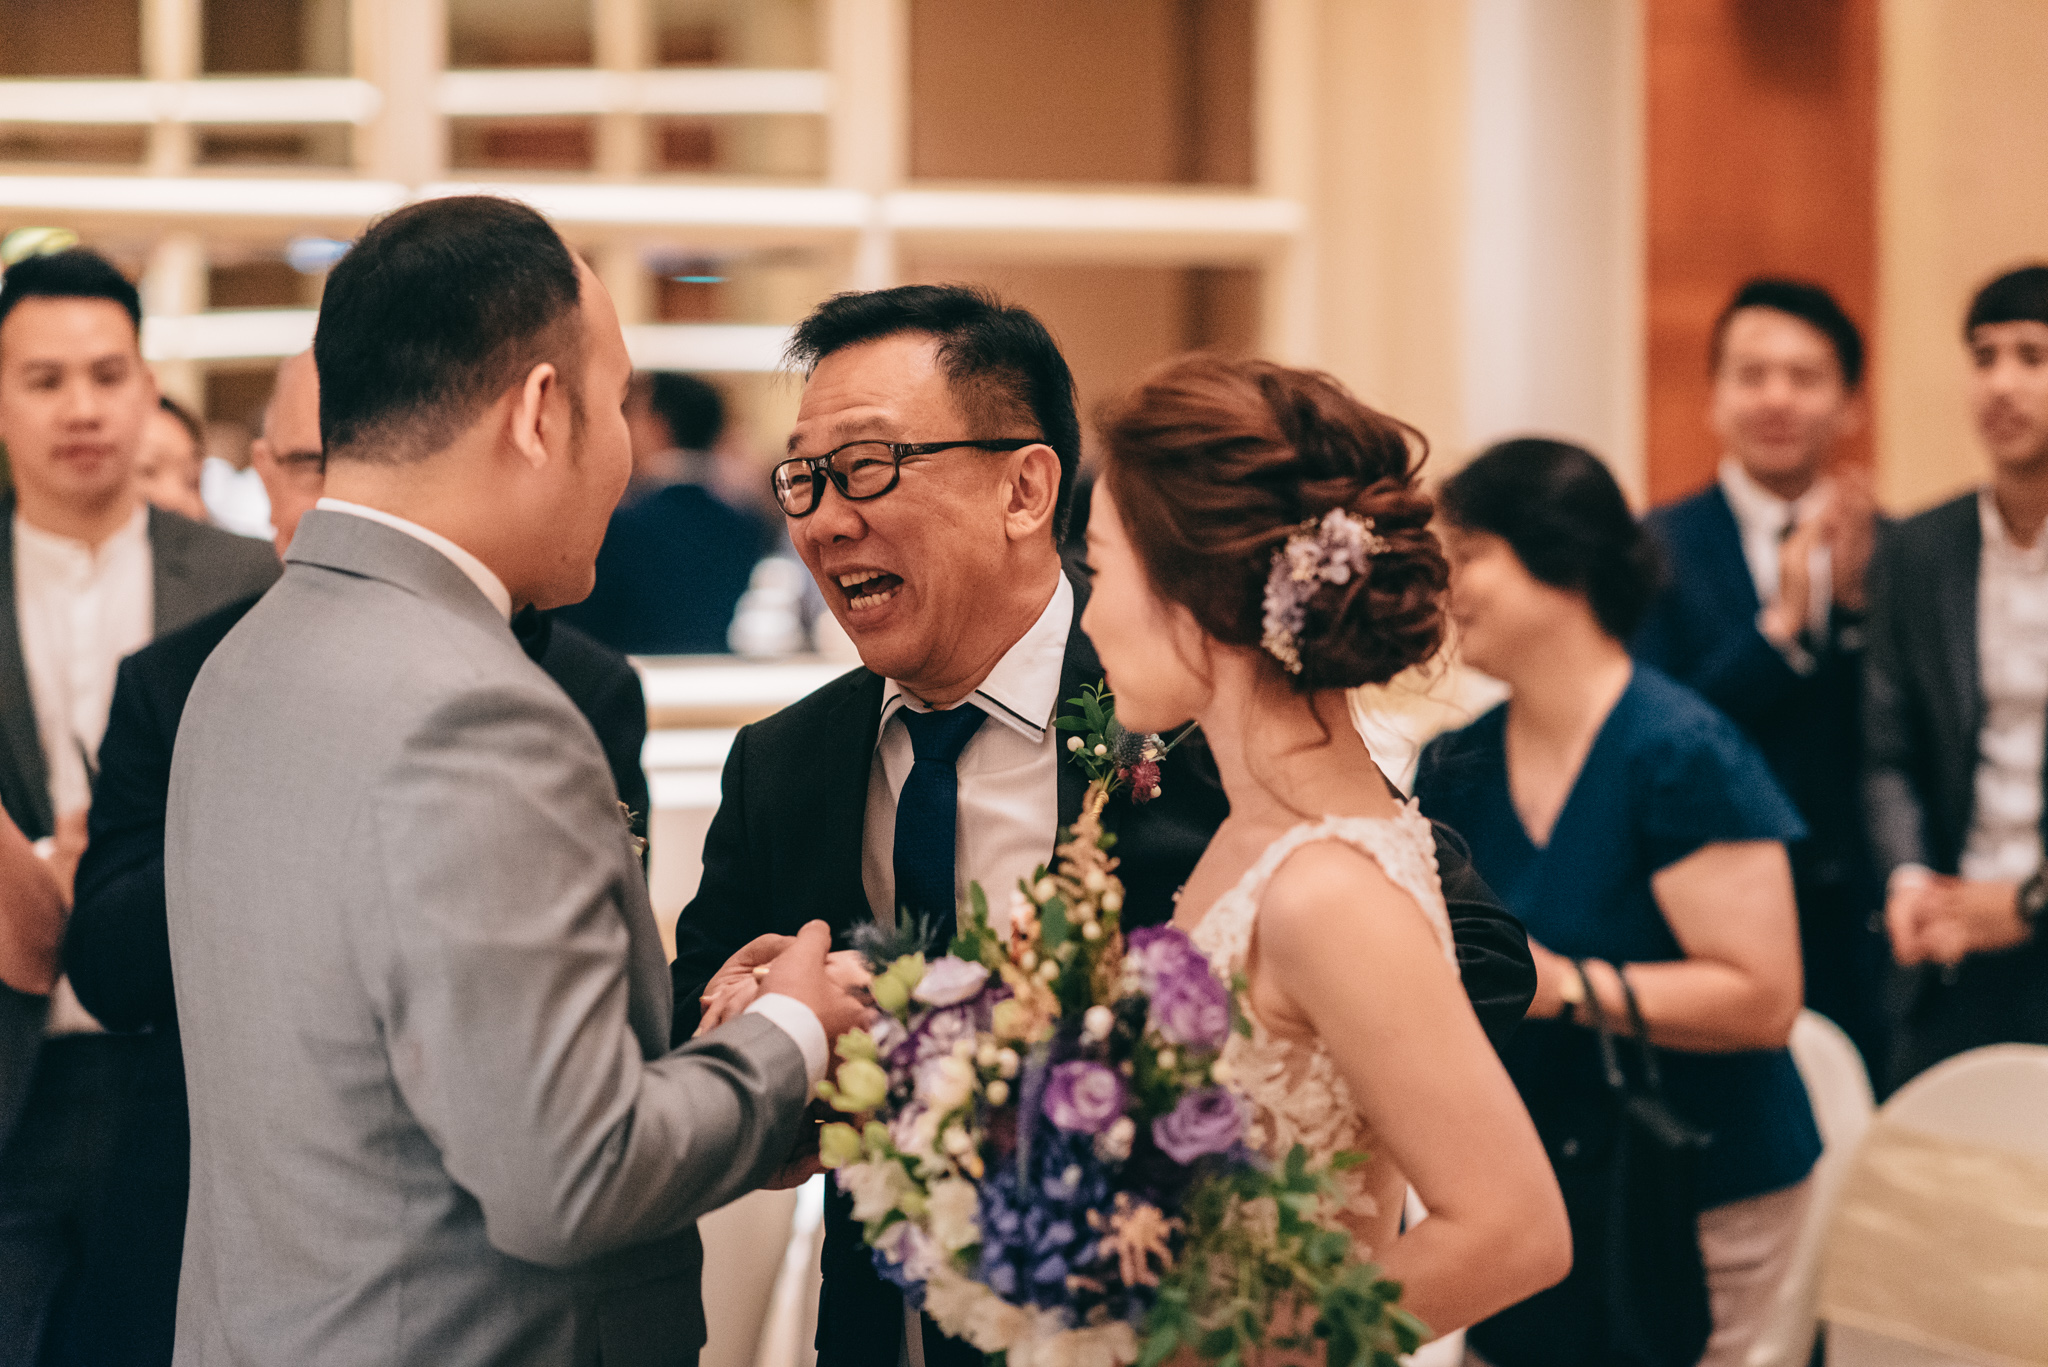 Eunice & Winshire Wedding Day Highlights (resized for sharing) - 132.jpg